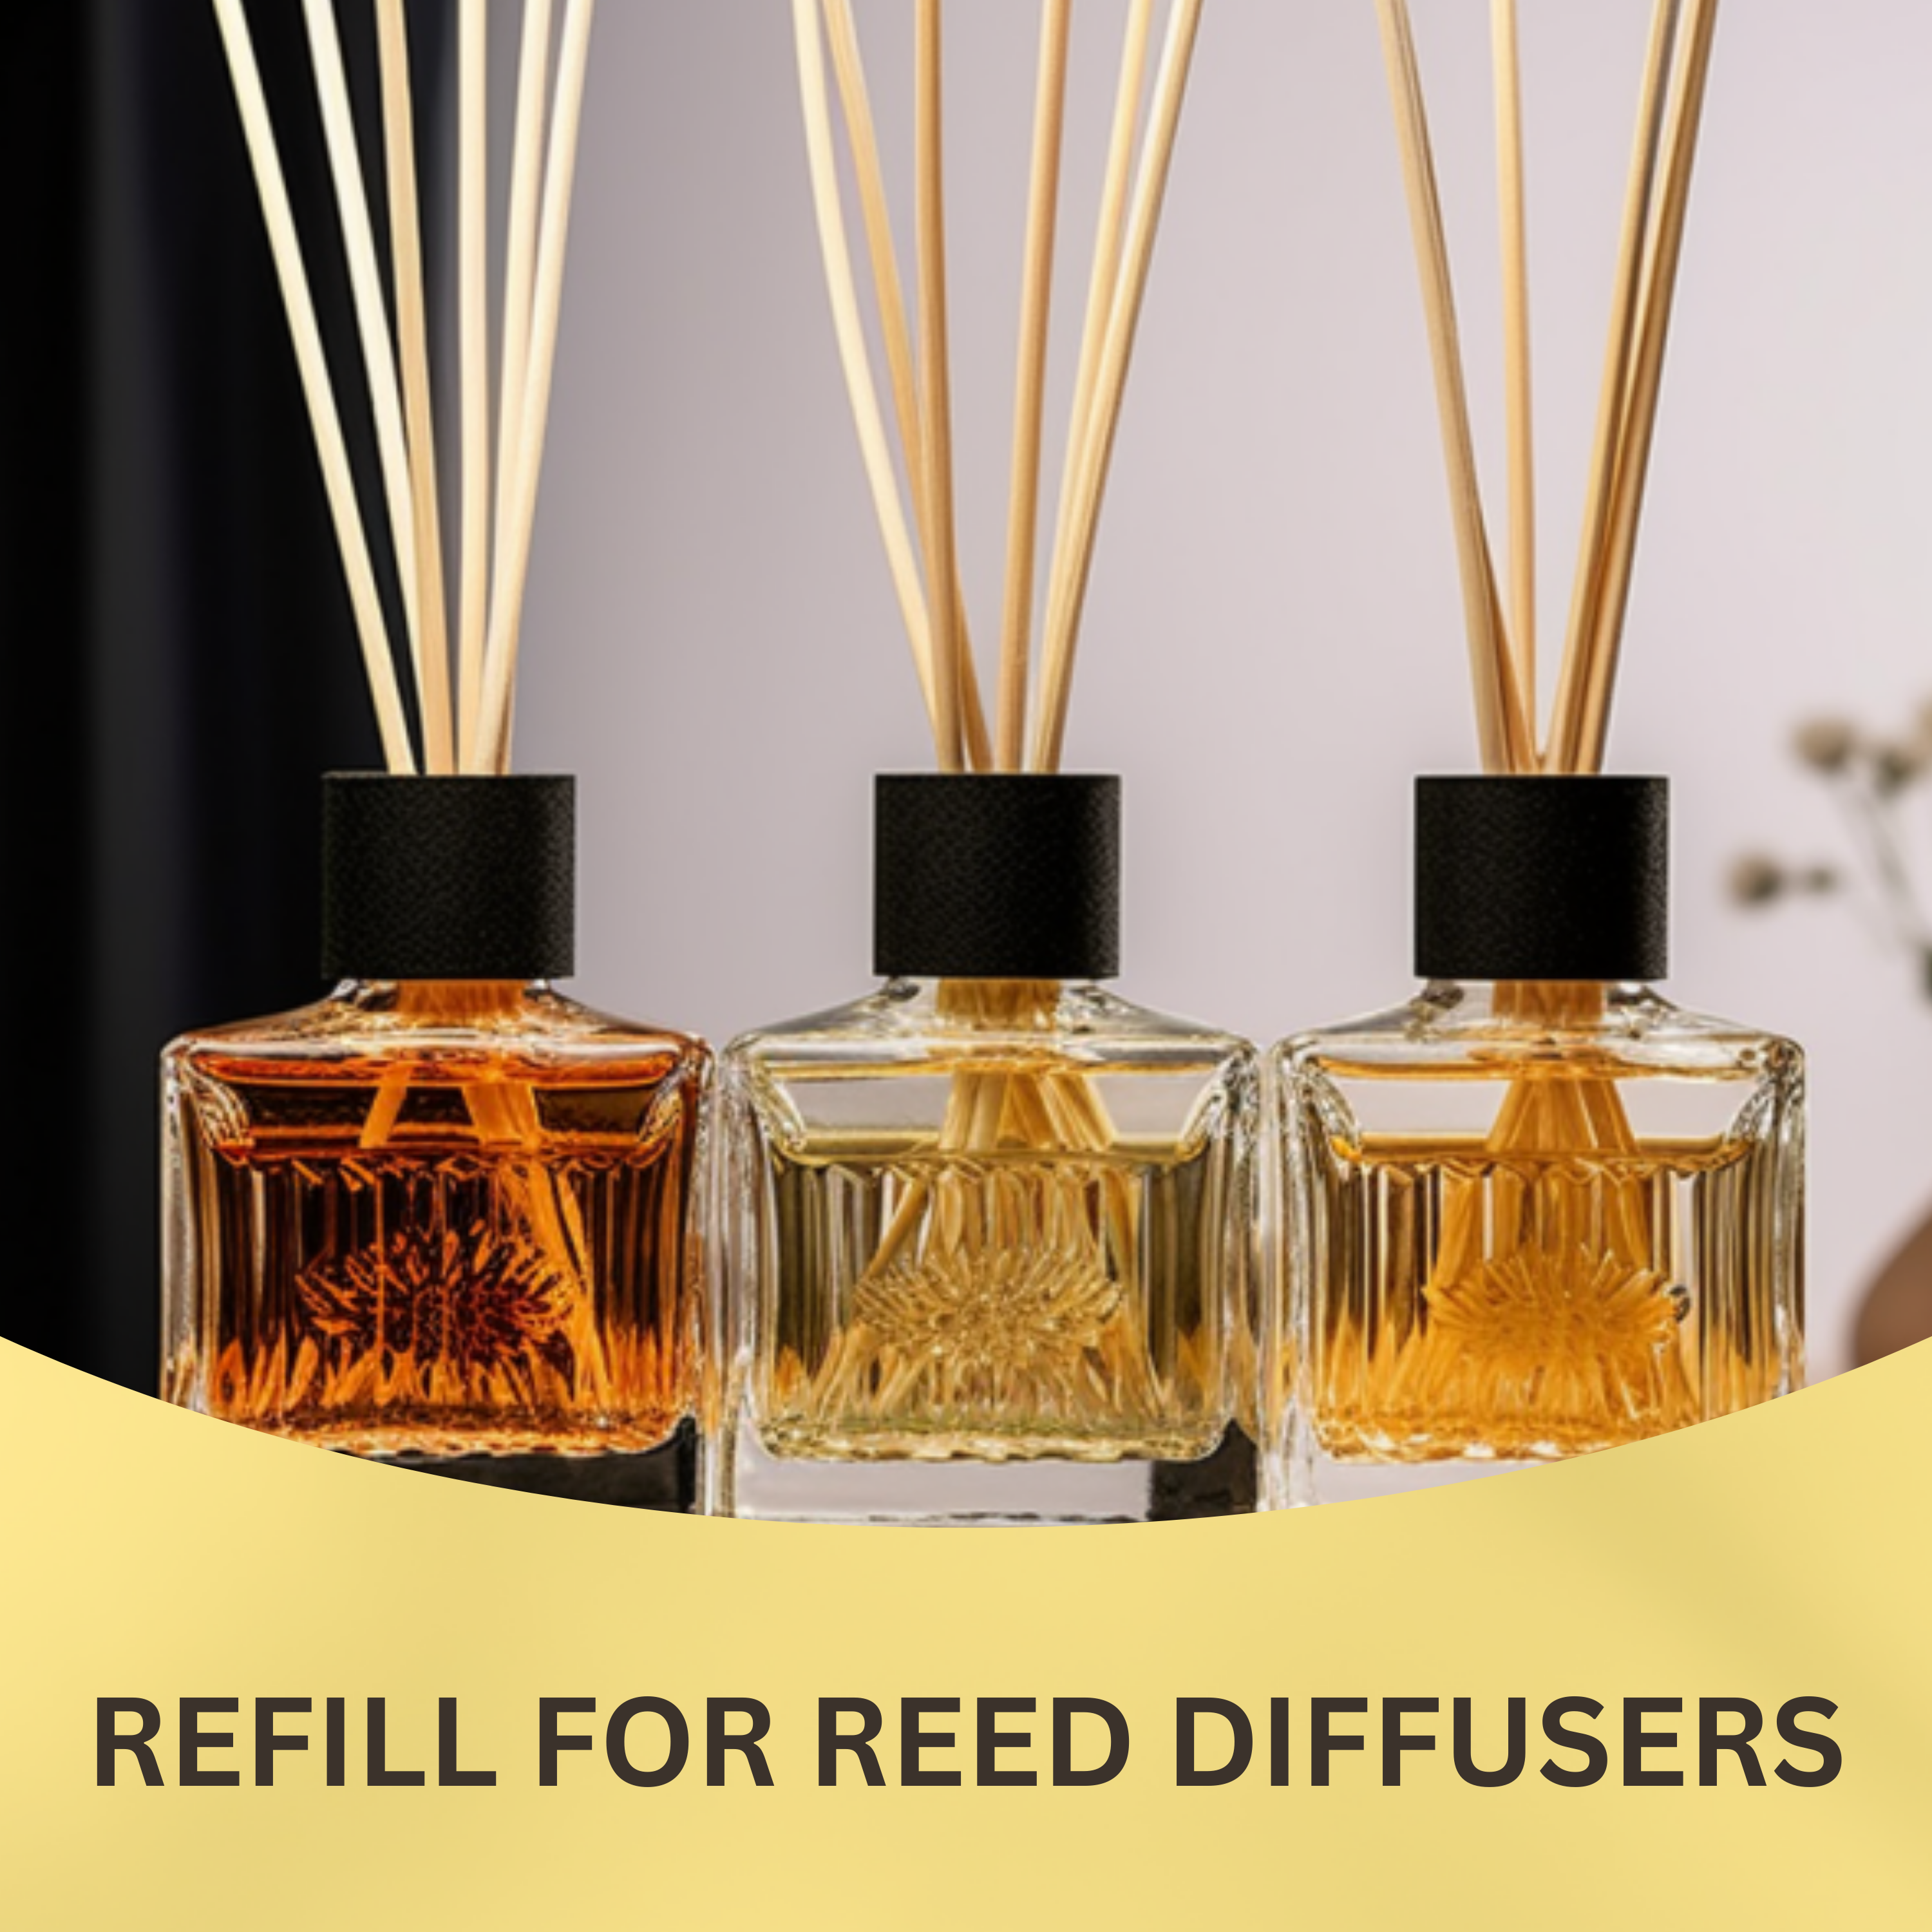 Black Canyon Berry Cinnamon Scented Reed Diffuser Oil Refill